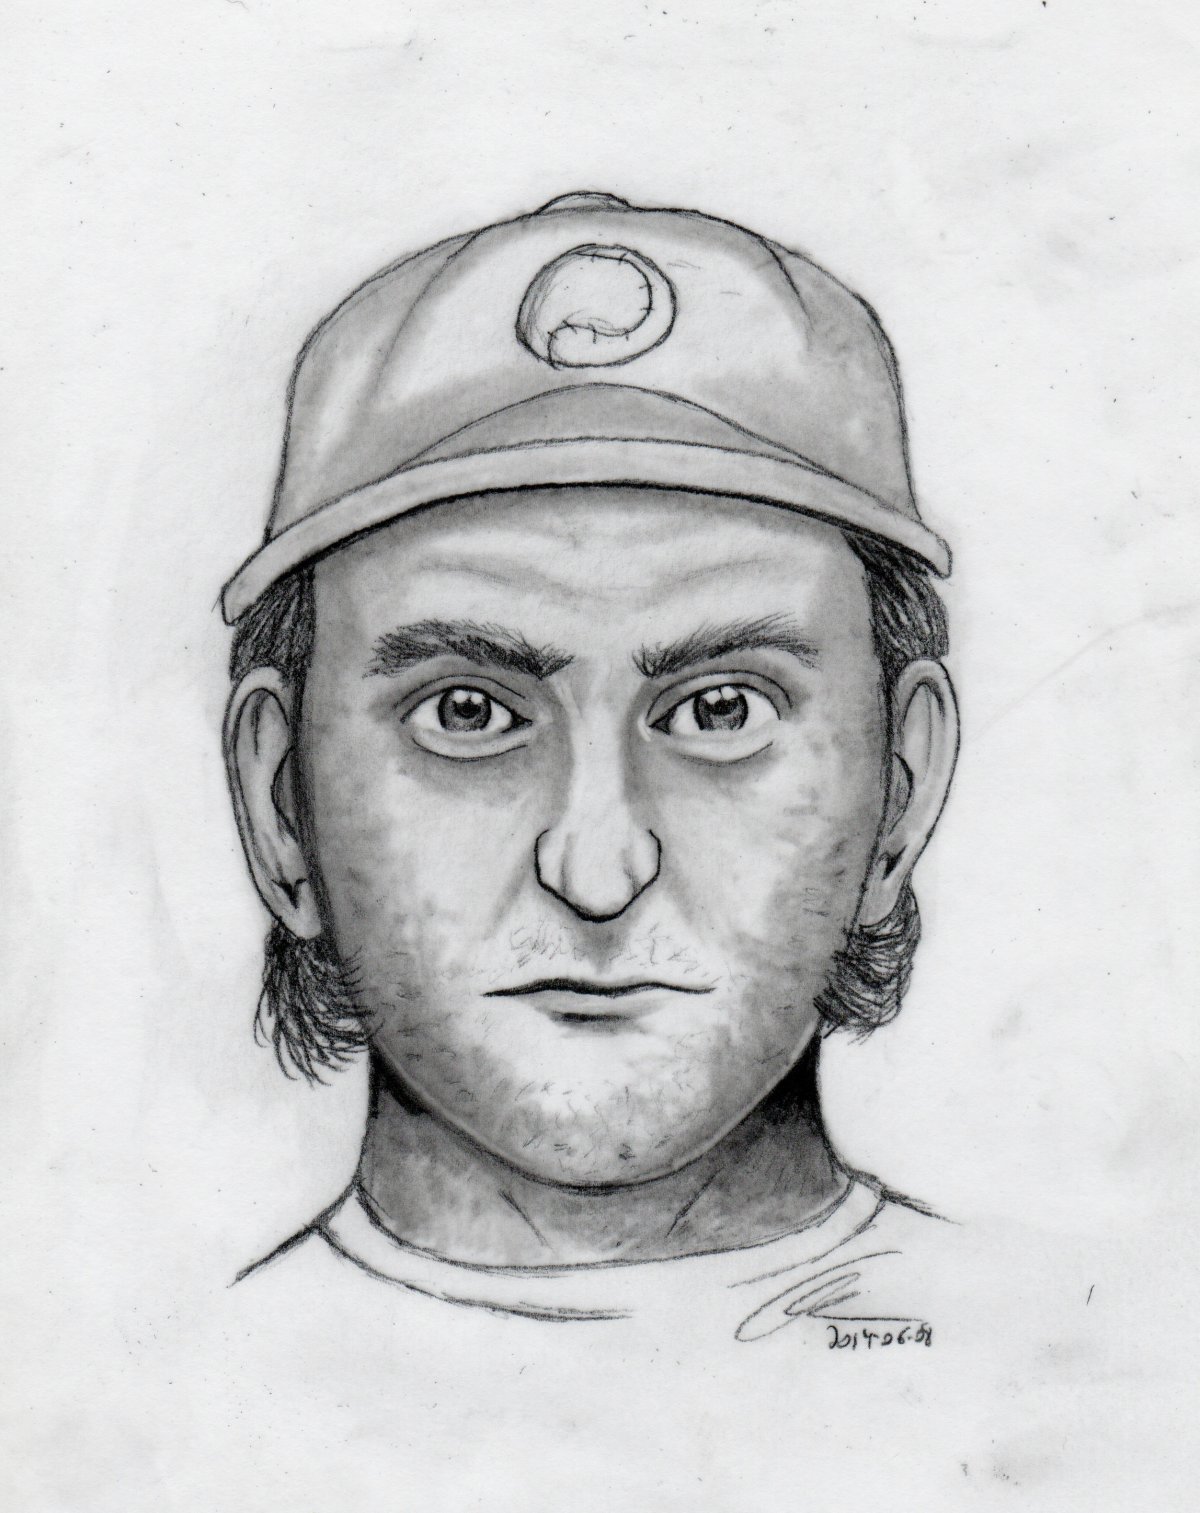 RCMP composite sketch of the suspect who allegedly tried to abduct a teenage girl in Red Deer. June 10, 2014.